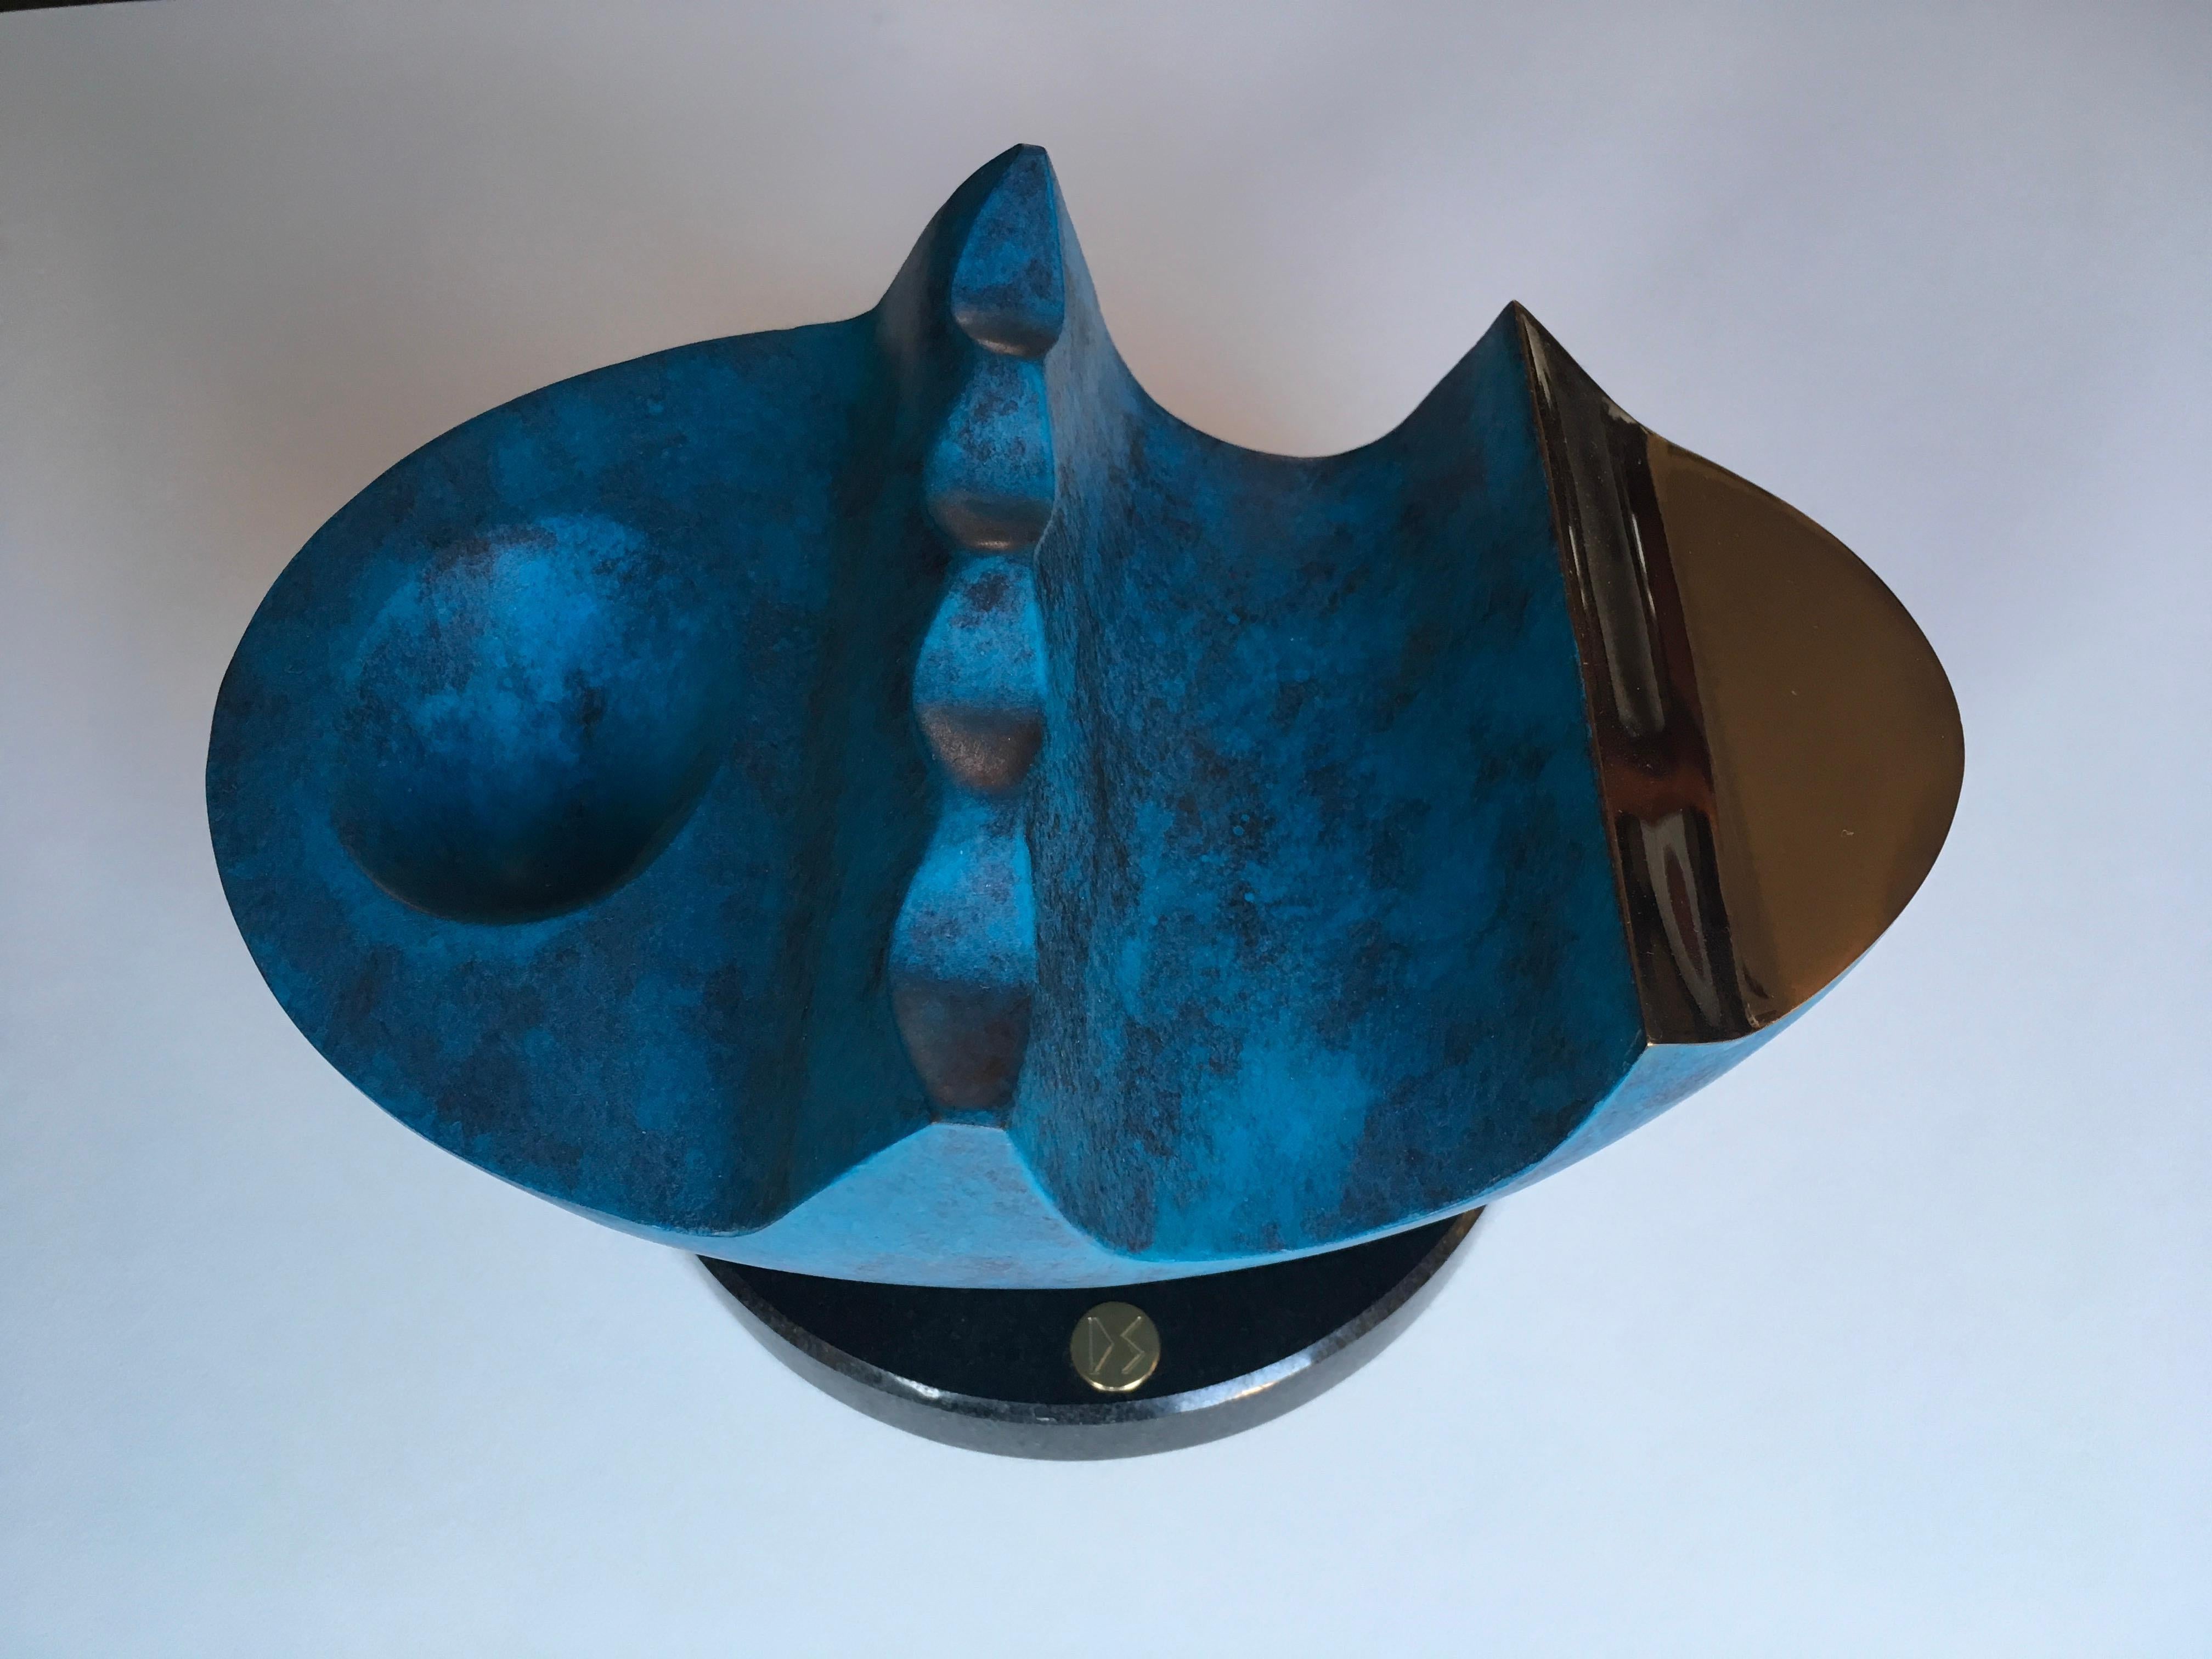 Tidal Stone  - Tabletop limited edition sculpture Bronze  - Sculpture by David Sprakes